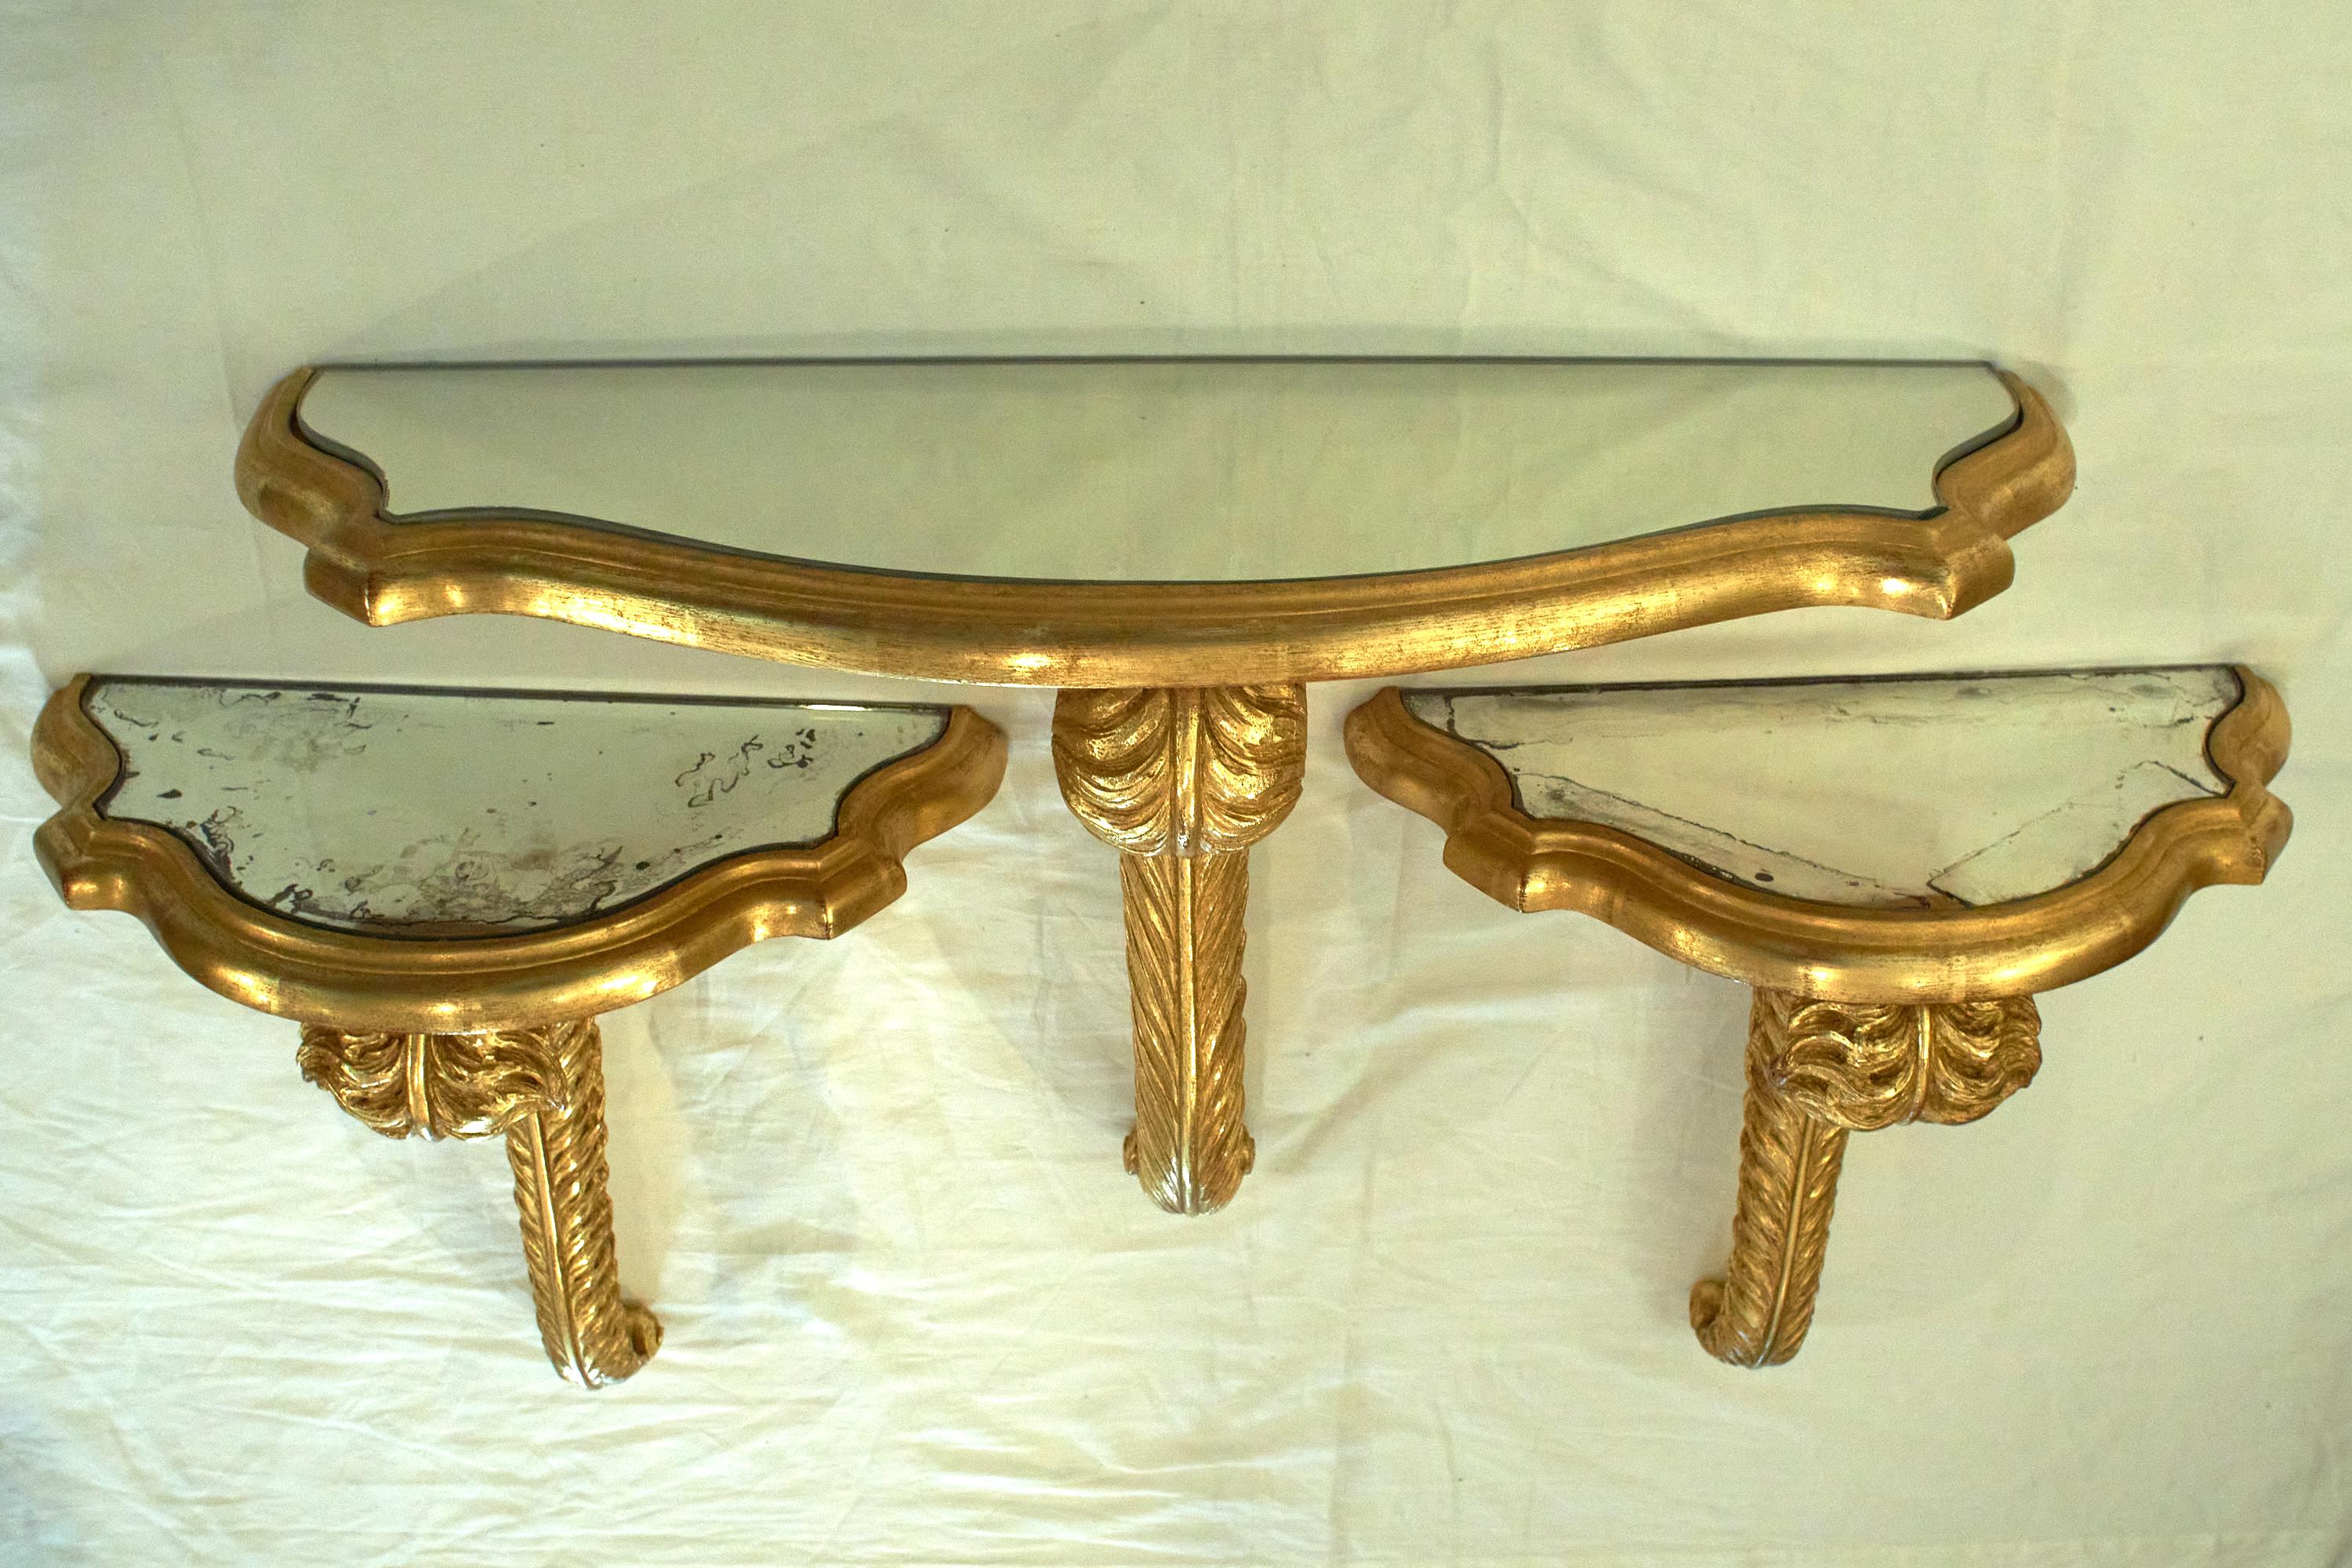 Set of wall brackets. Giltwood with carved feather plume motif and mirror top.

Measures: 1 Large shelf measures 32